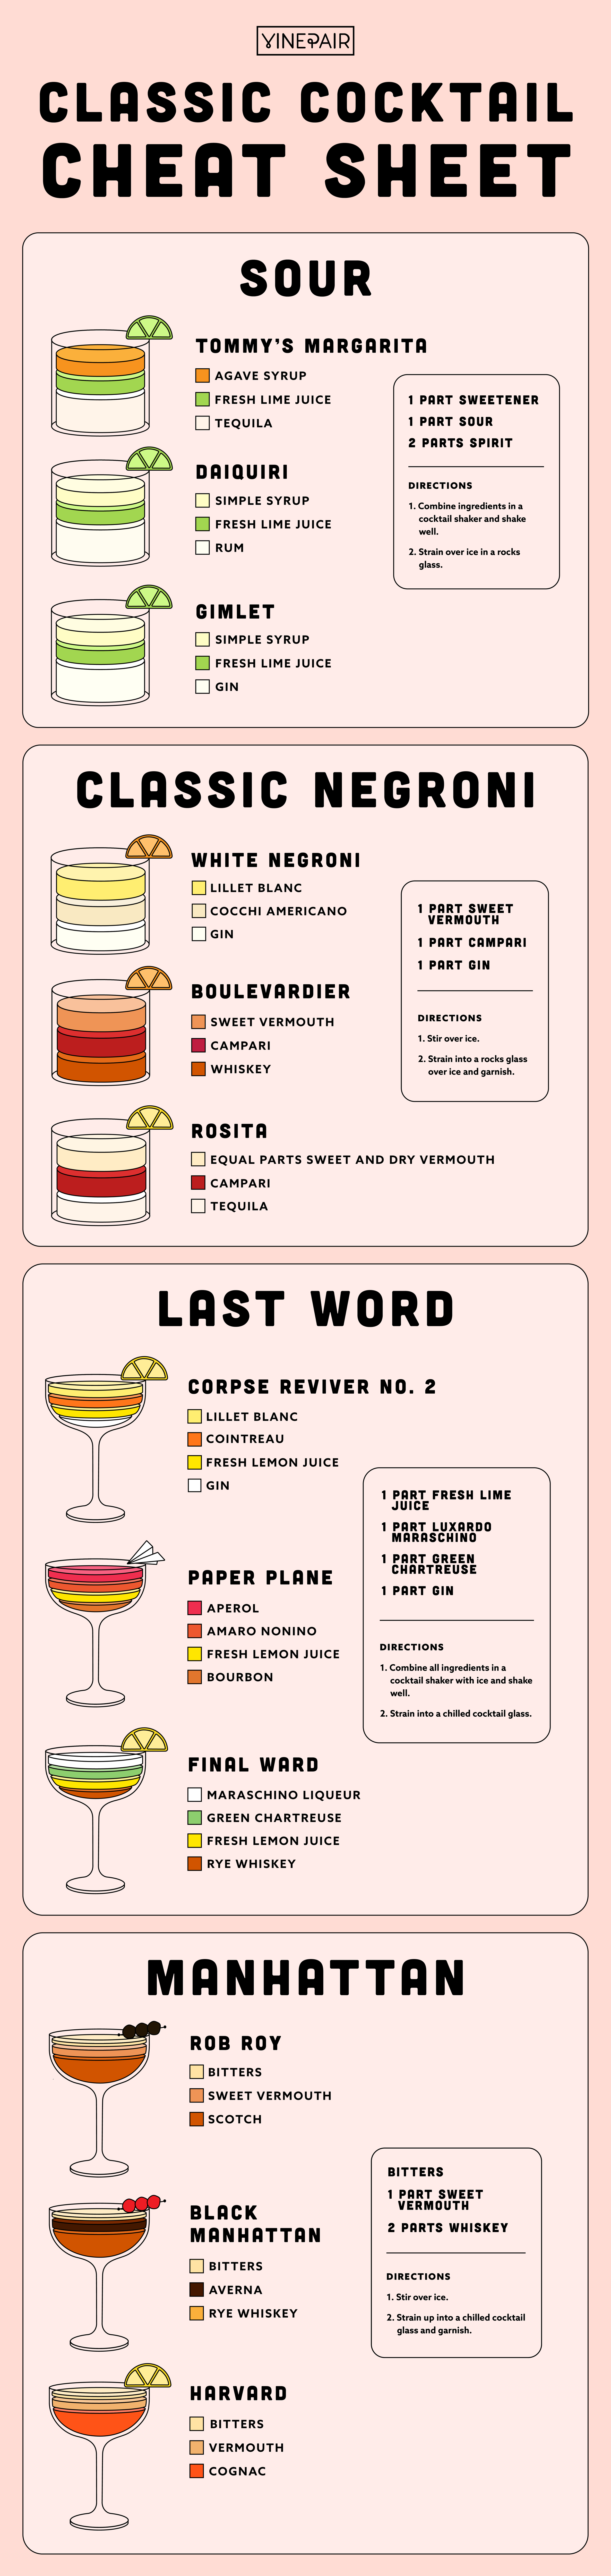 The Ultimate Cheat Sheet for Classic Cocktails [Infographic]